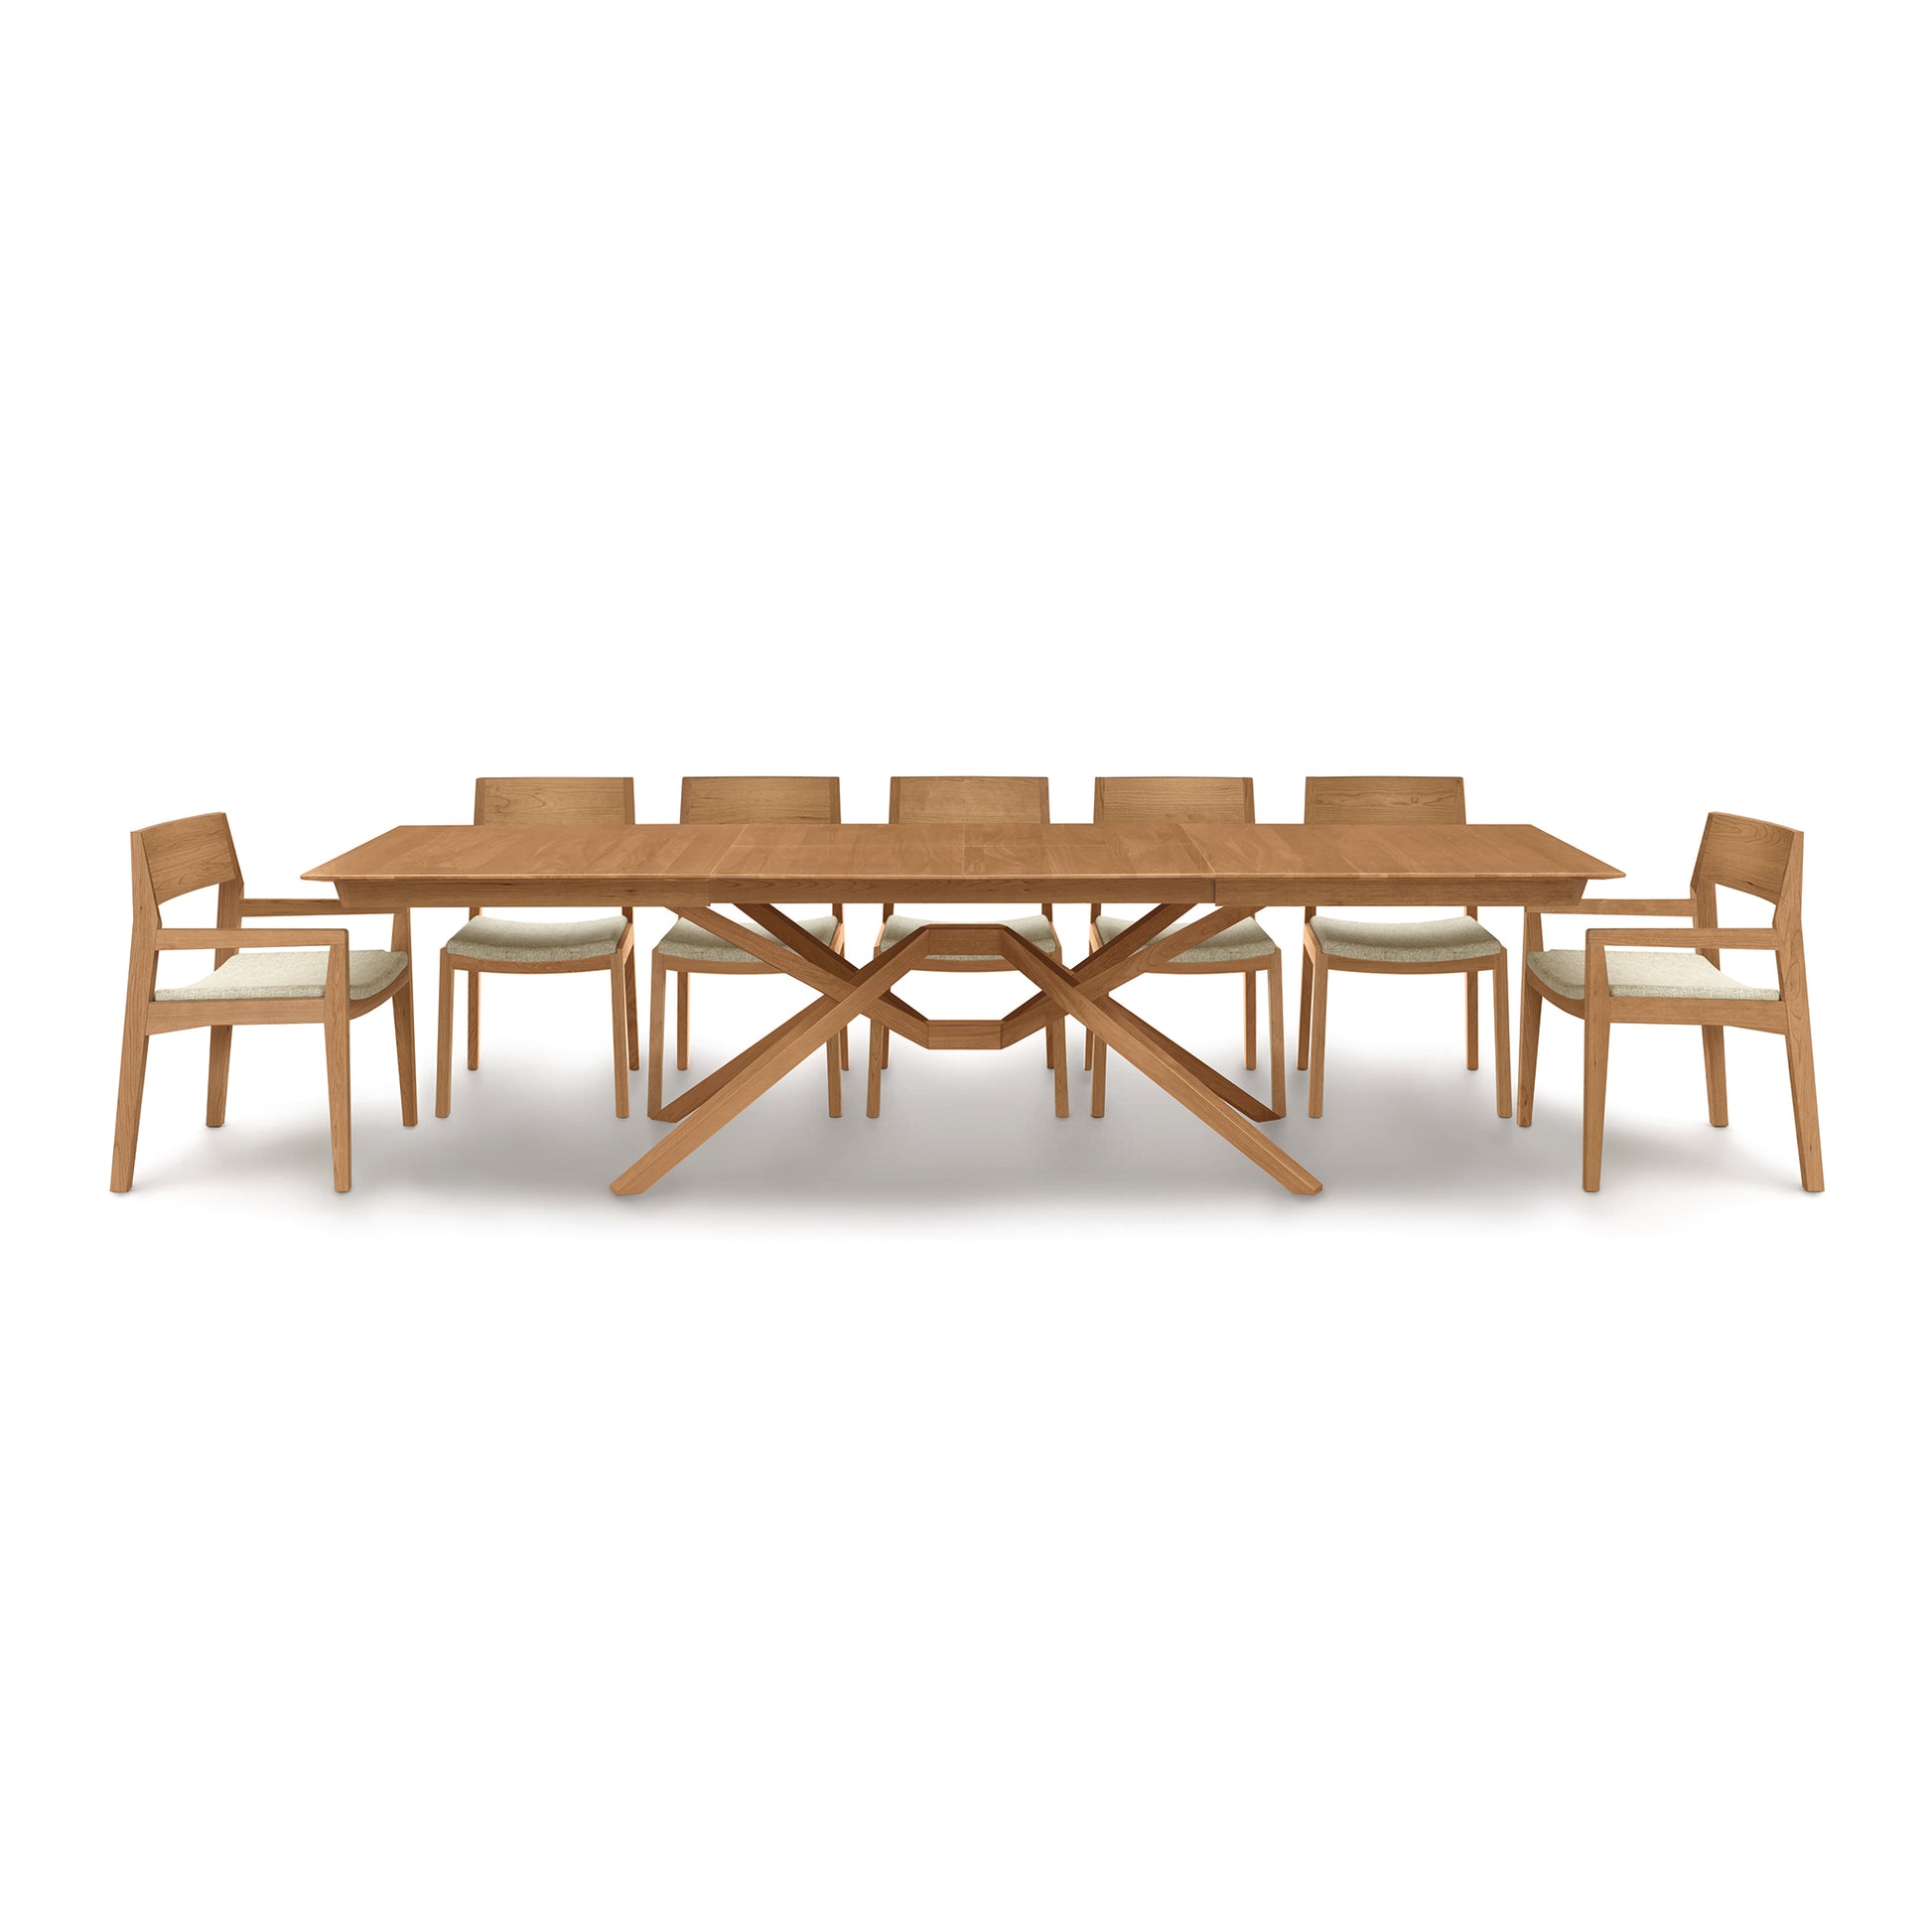 An Exeter Extension Dining Table set with eight chairs, featuring a butterfly leaf extension, on a white background by Copeland Furniture.